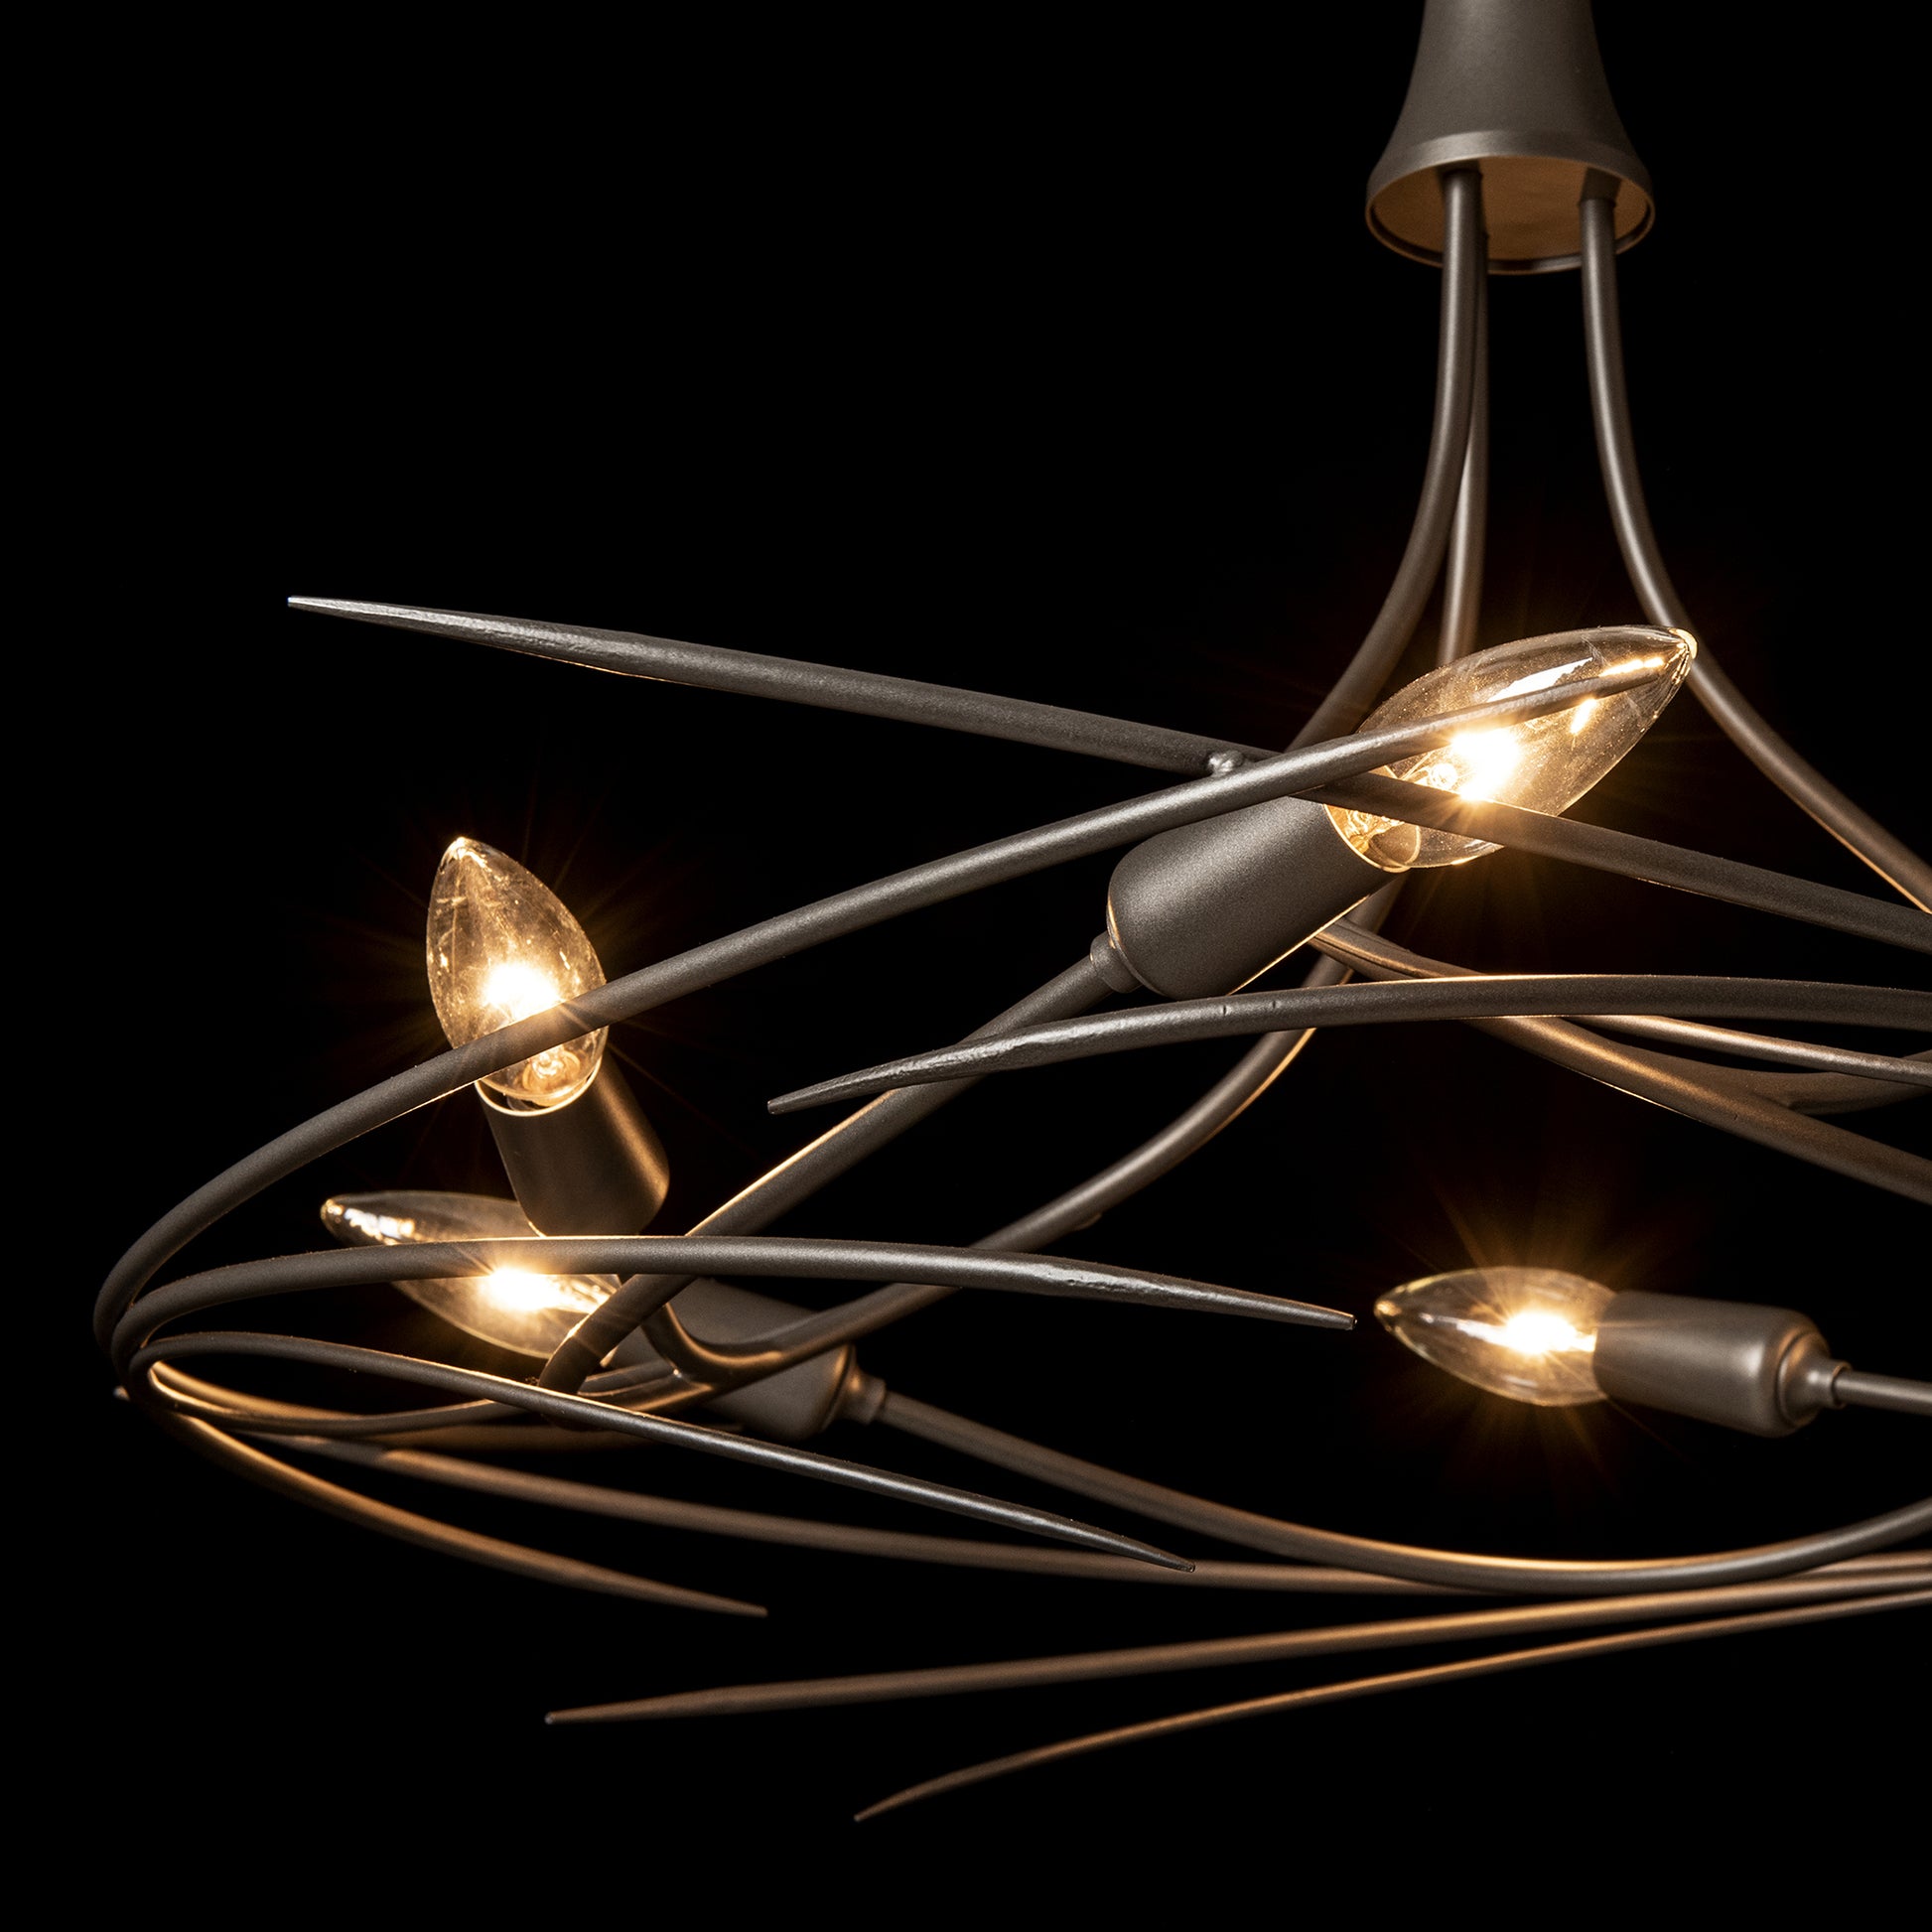 The Hubbardton Forge Wisp 6-Light Chandelier showcases an elegant silhouette with fine tailoring, featuring four lights.